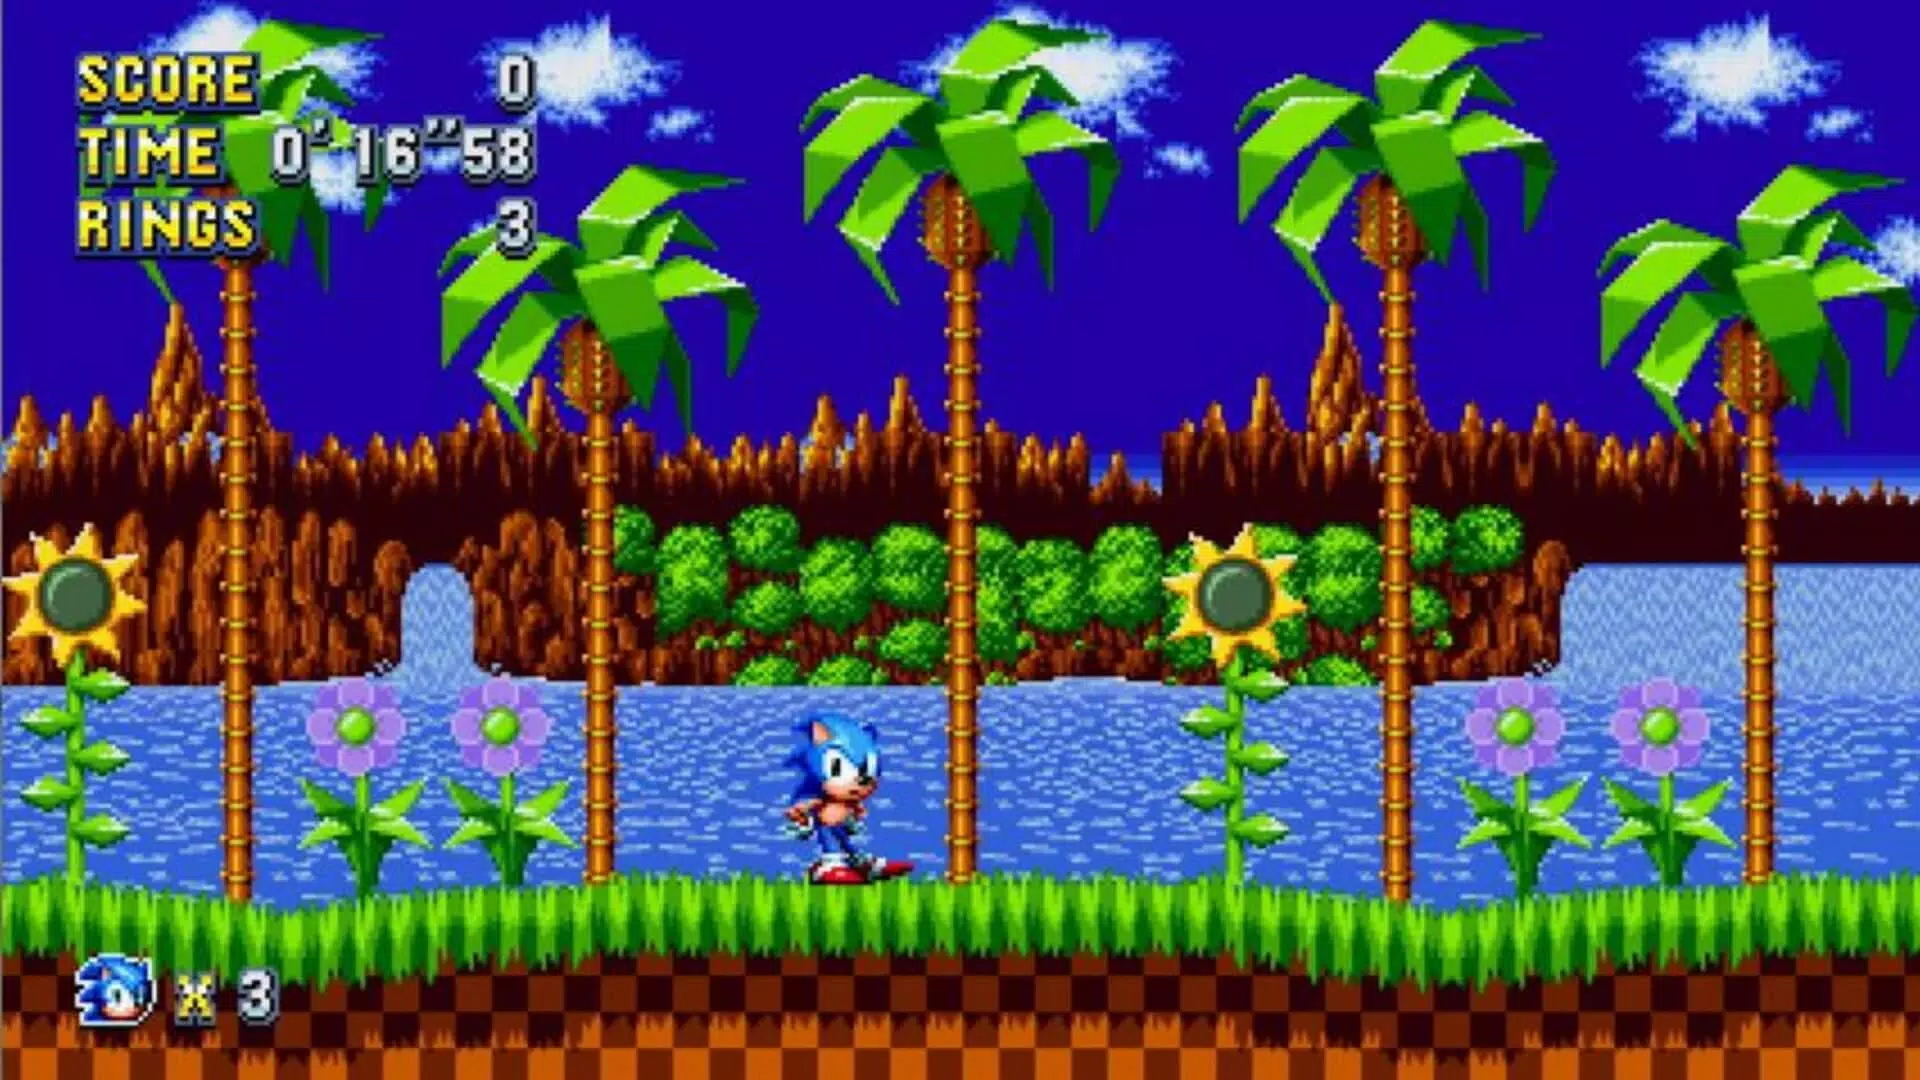 sonic 3 Game for Android - Download